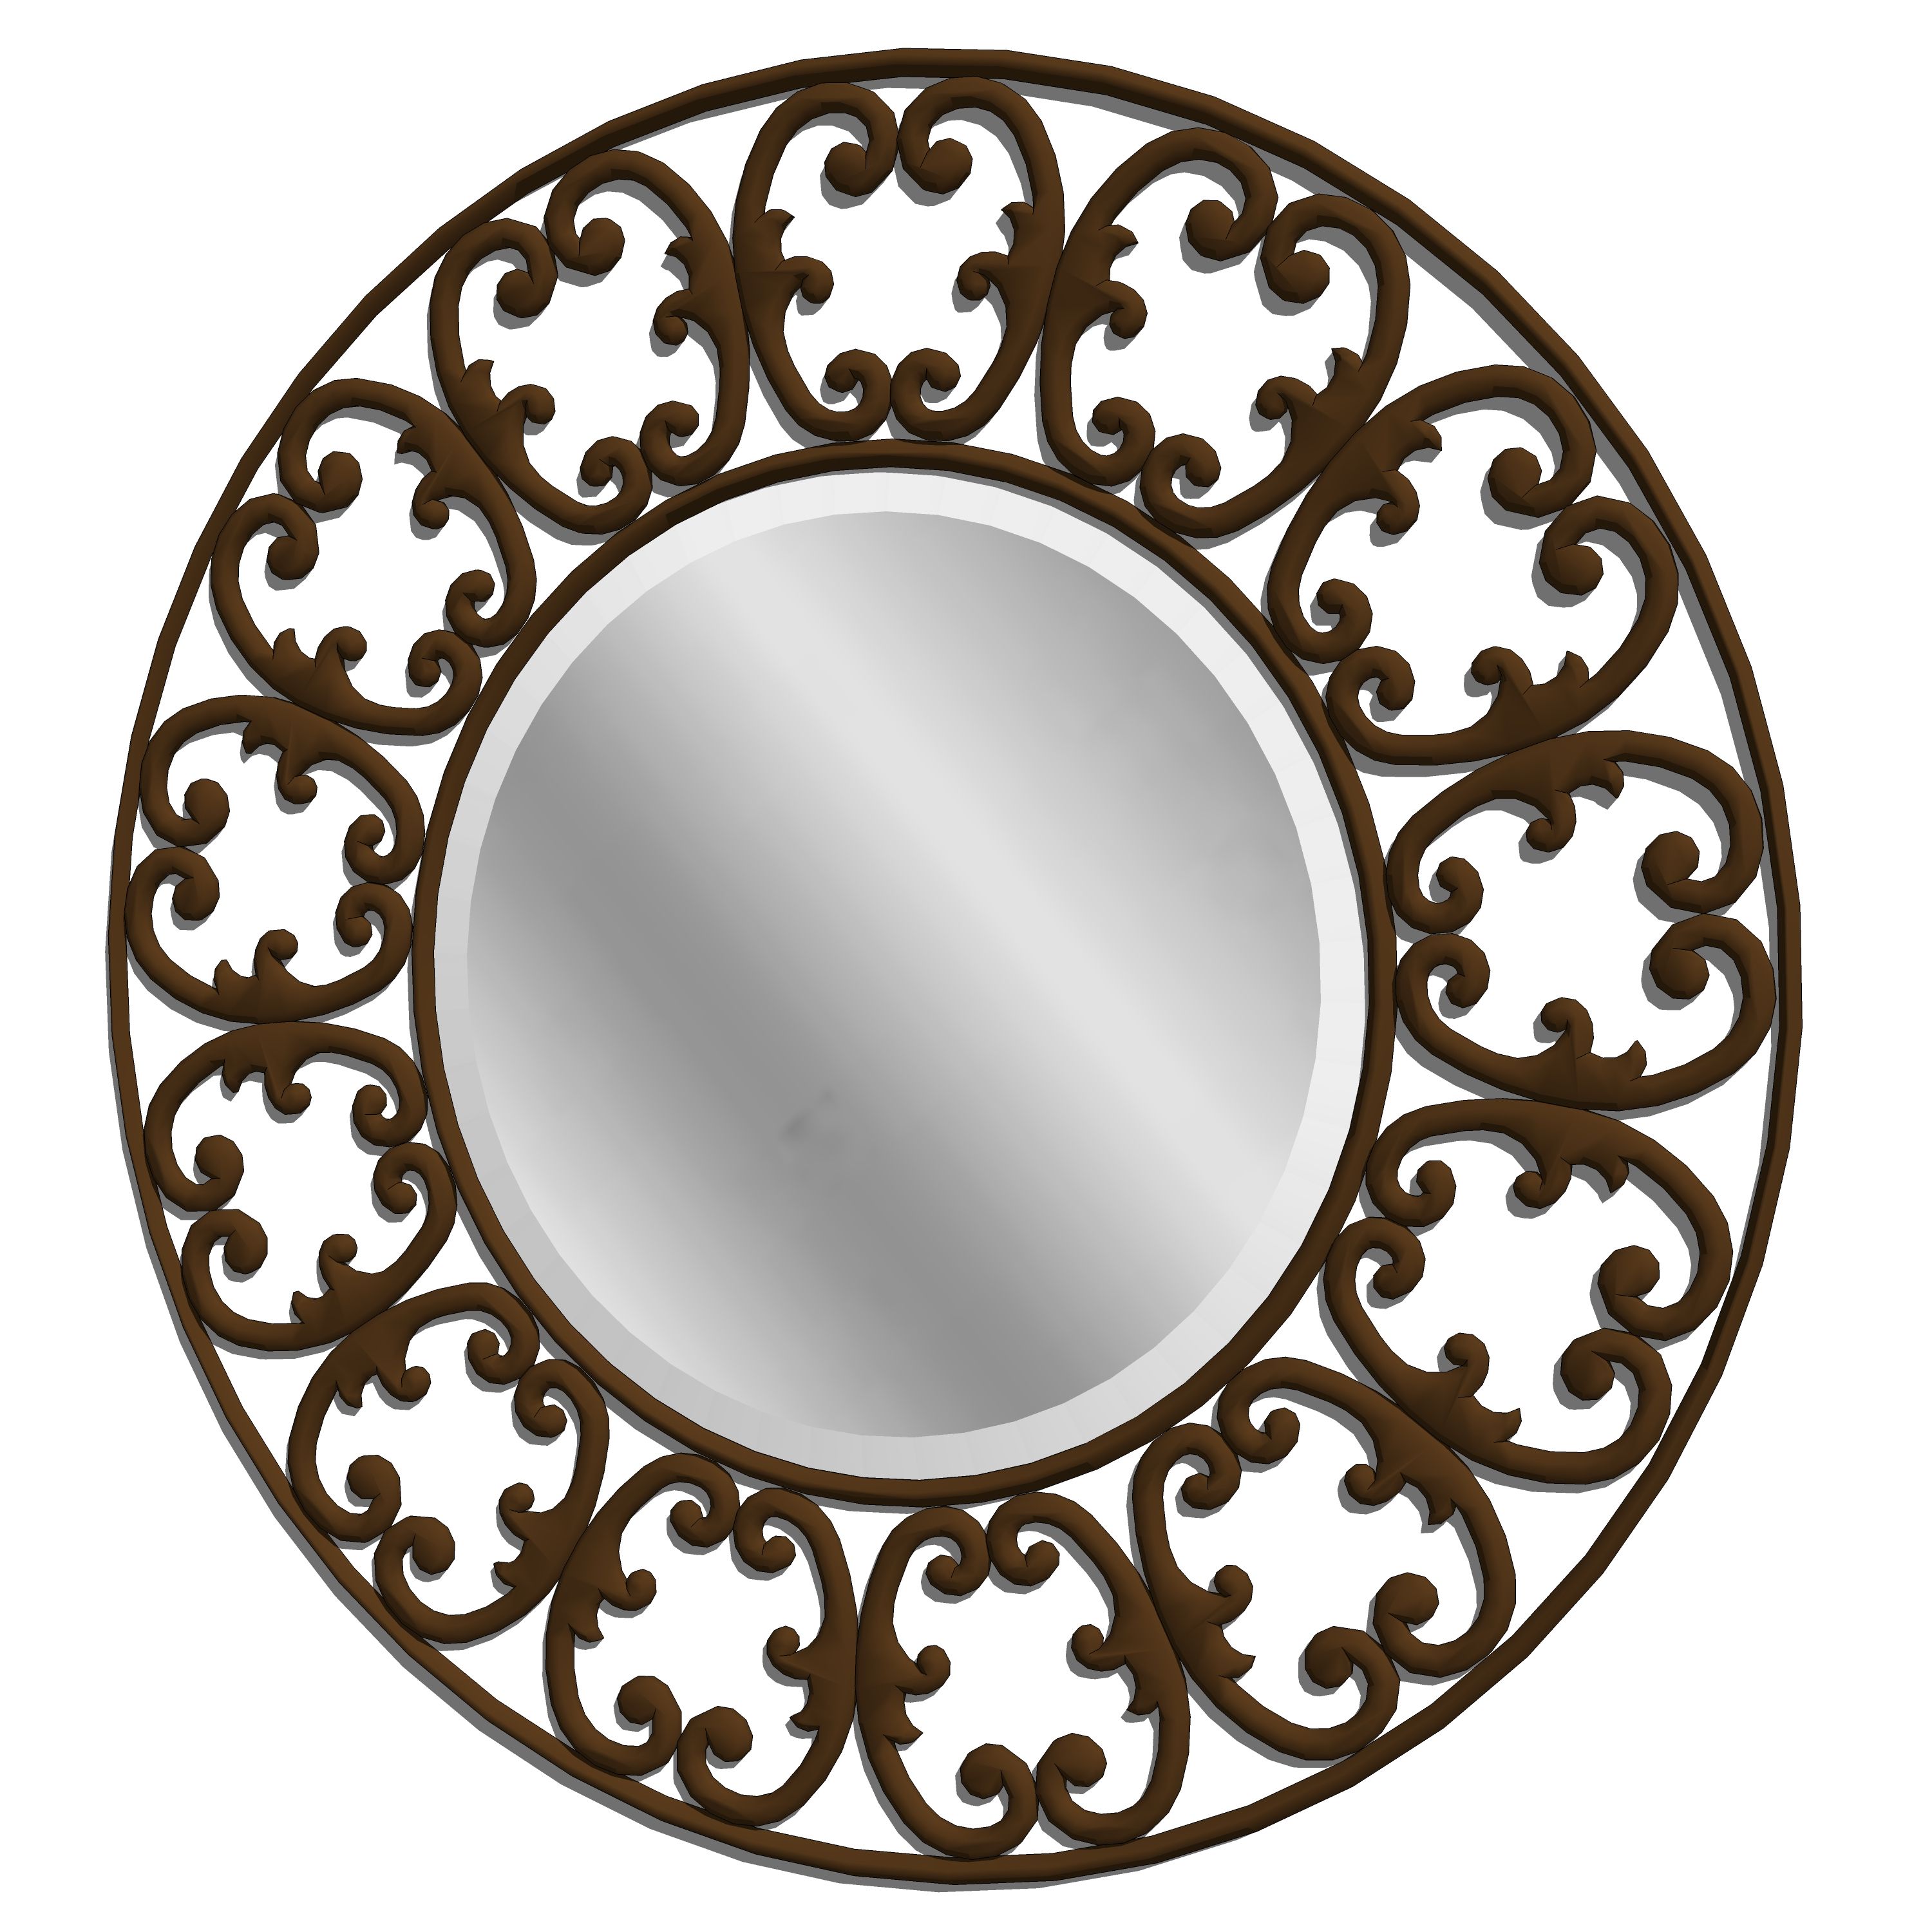 Scrolled Mirror D Model Models Textures Black Scroll Wood Pertaining To Preferred Wrought Iron Wall Mirrors (View 15 of 20)